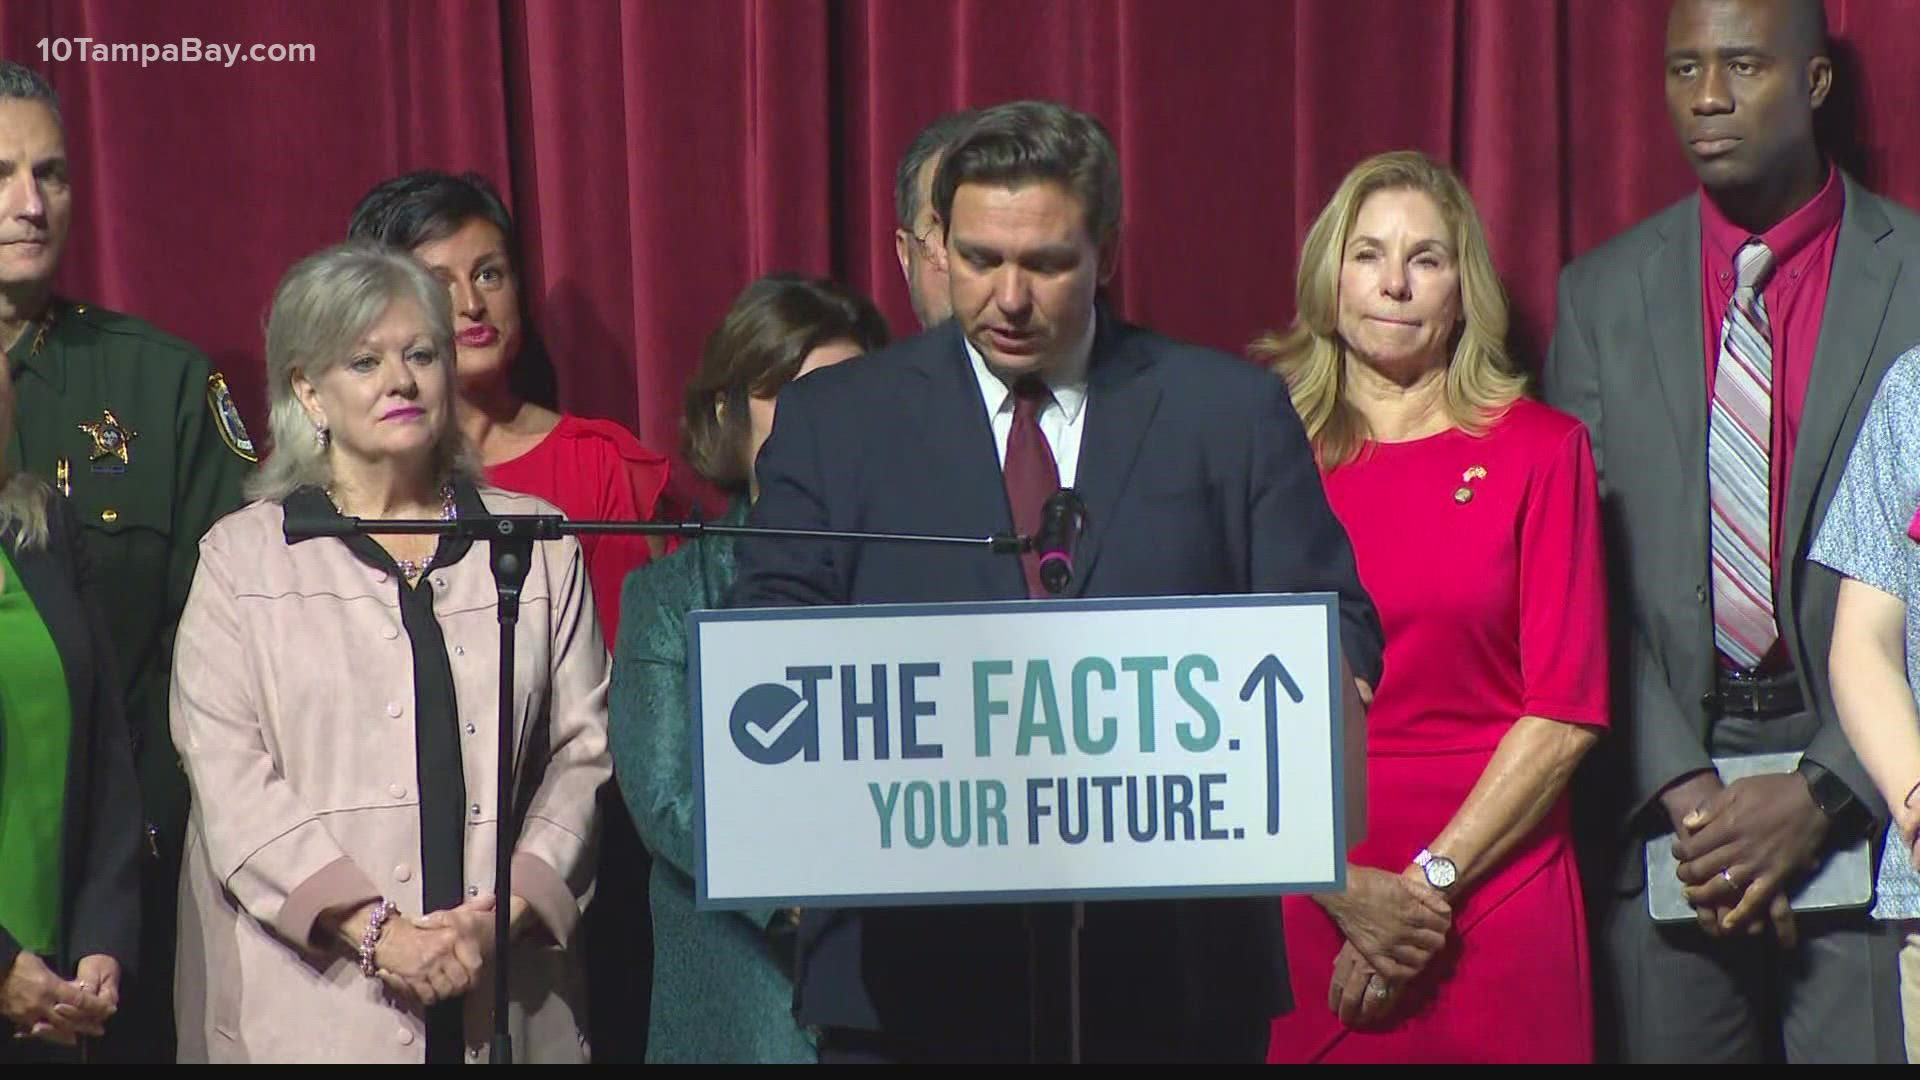 Florida Departments of Education and Health are partnering together to help middle, high school students through the "The Facts, Your Future" campaign.